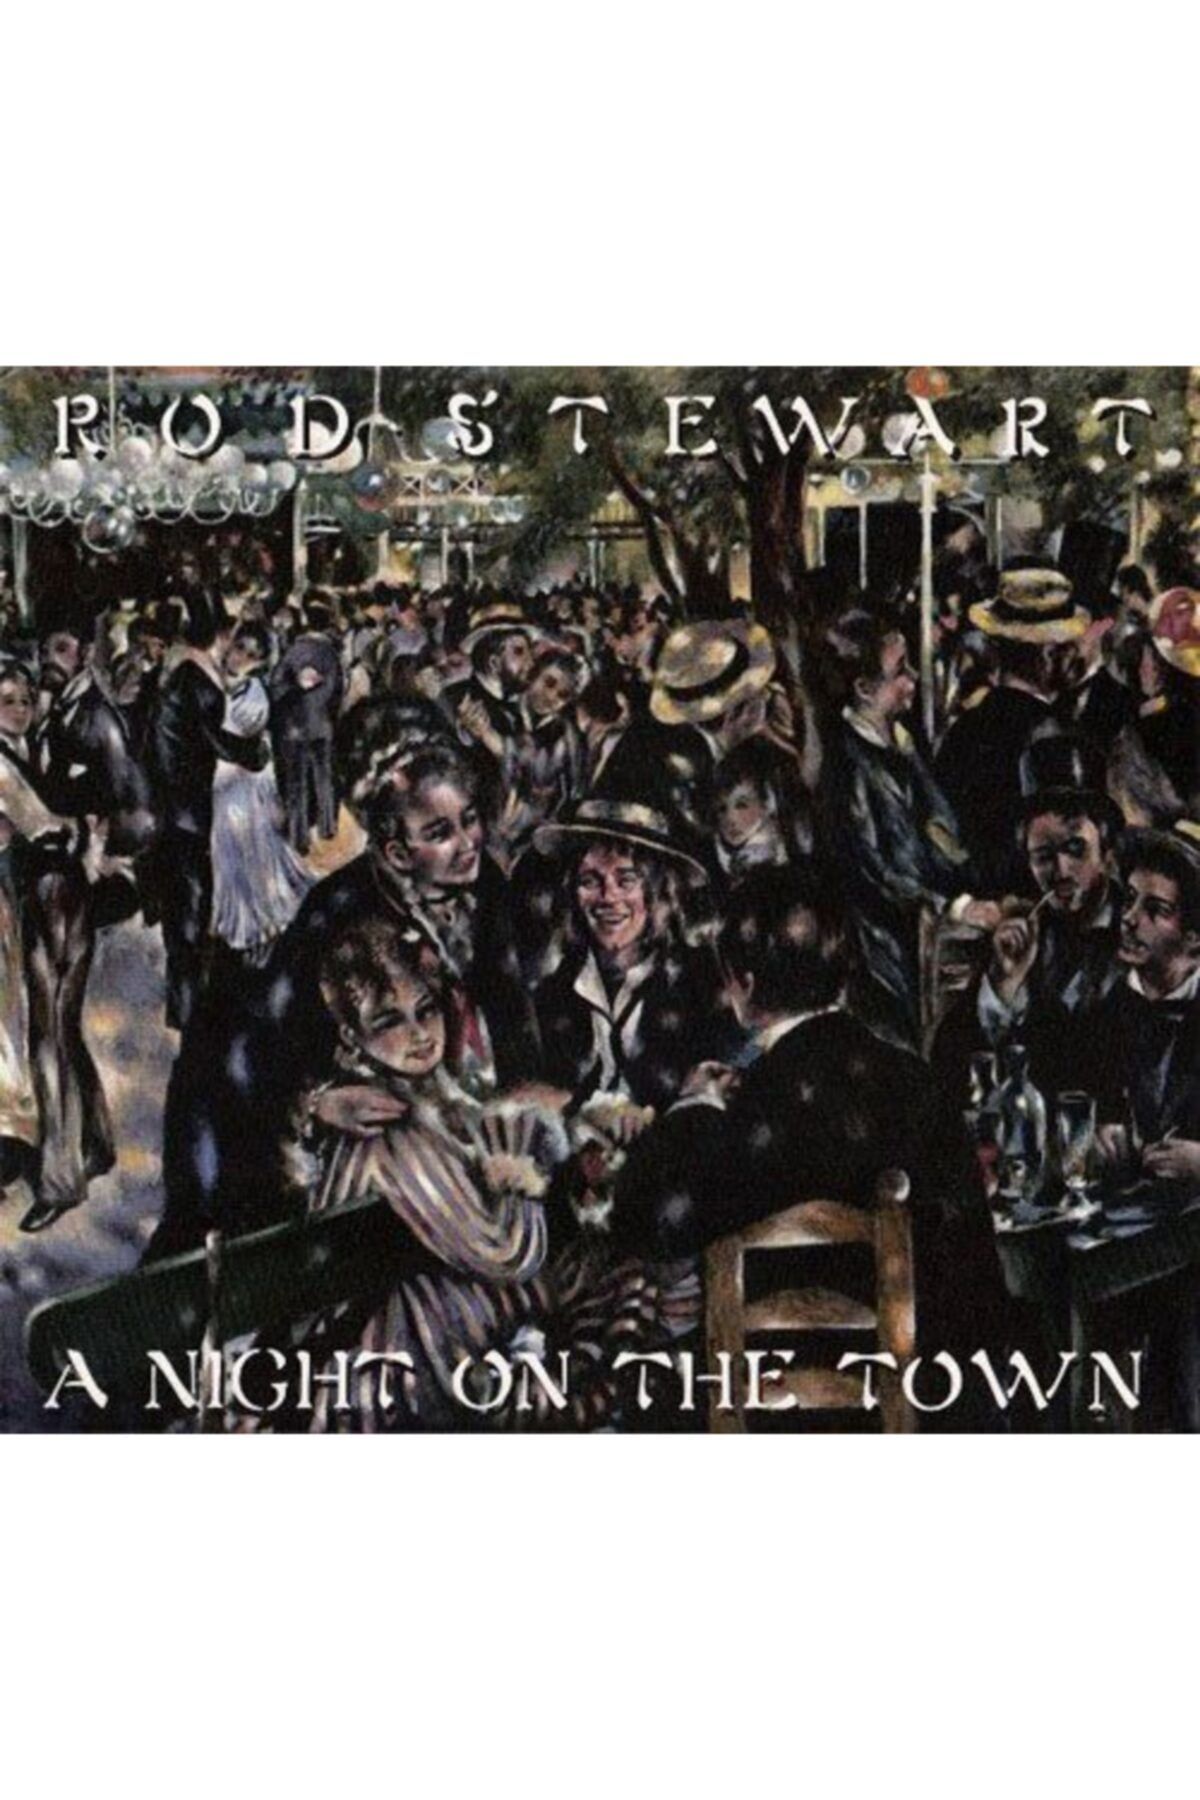 Warner Bros Cd - Rod Stewart - A Nıght On The Town Expand